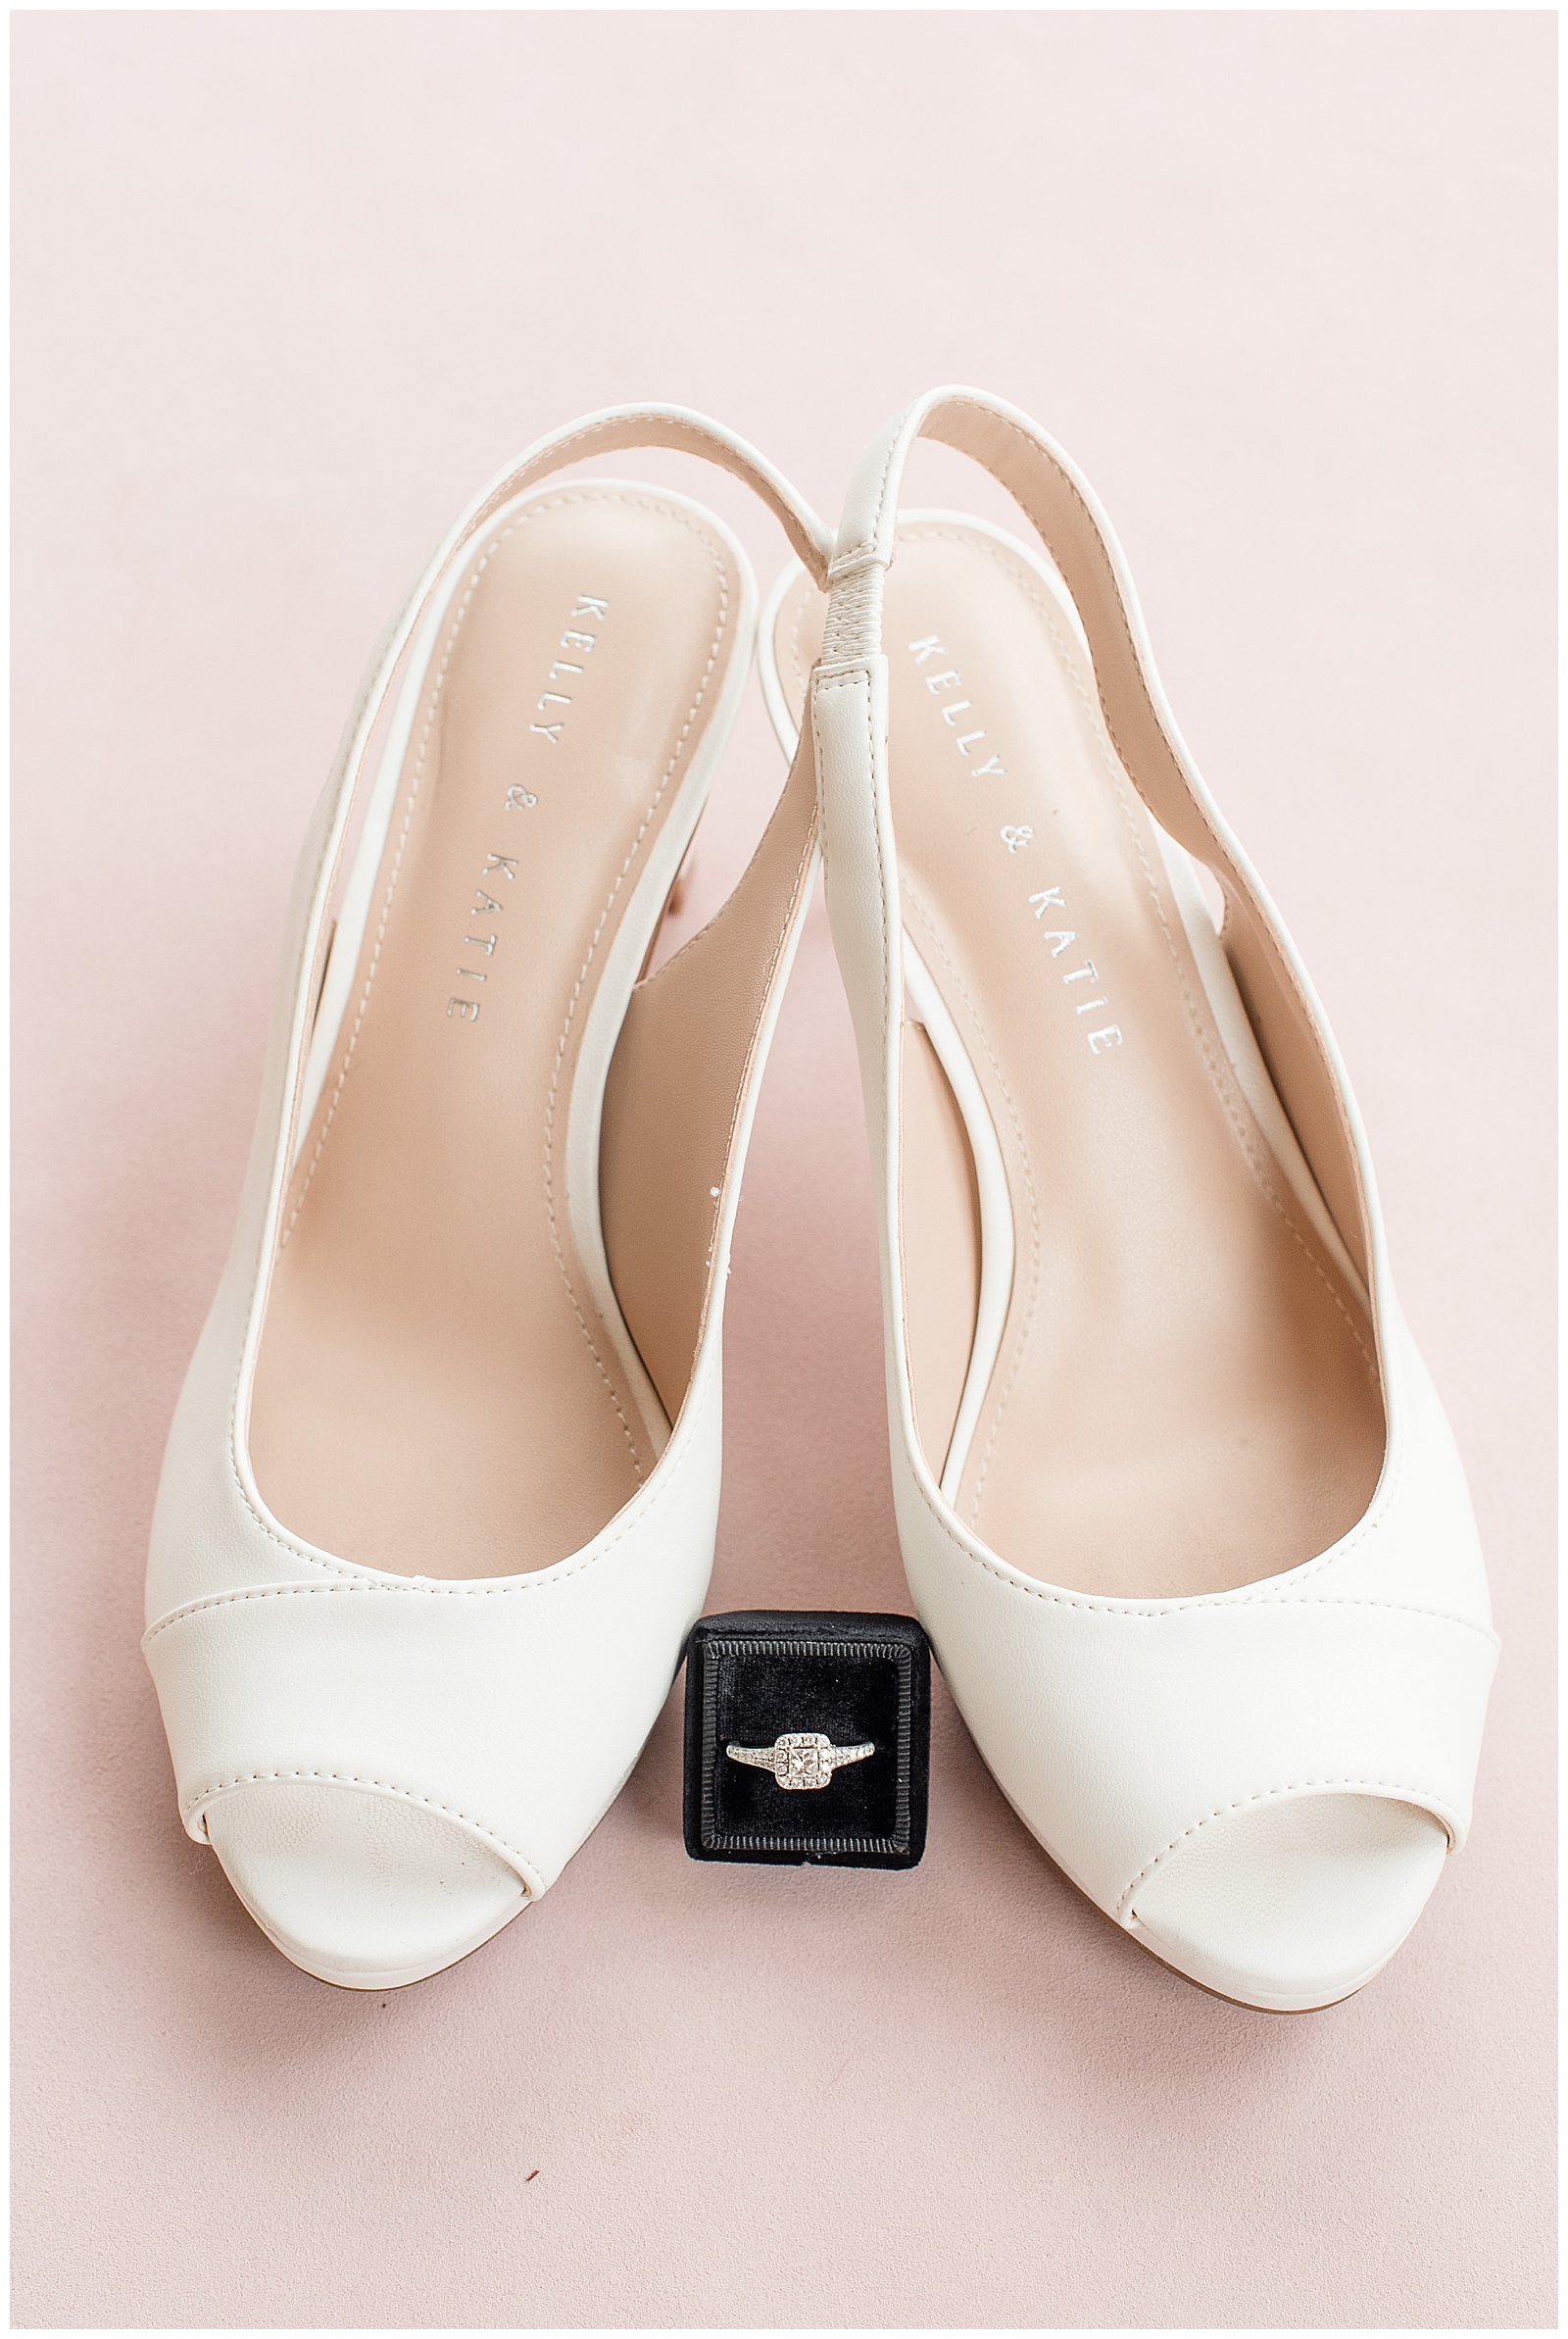 brides white shoes with diamond ring in black box on blush background